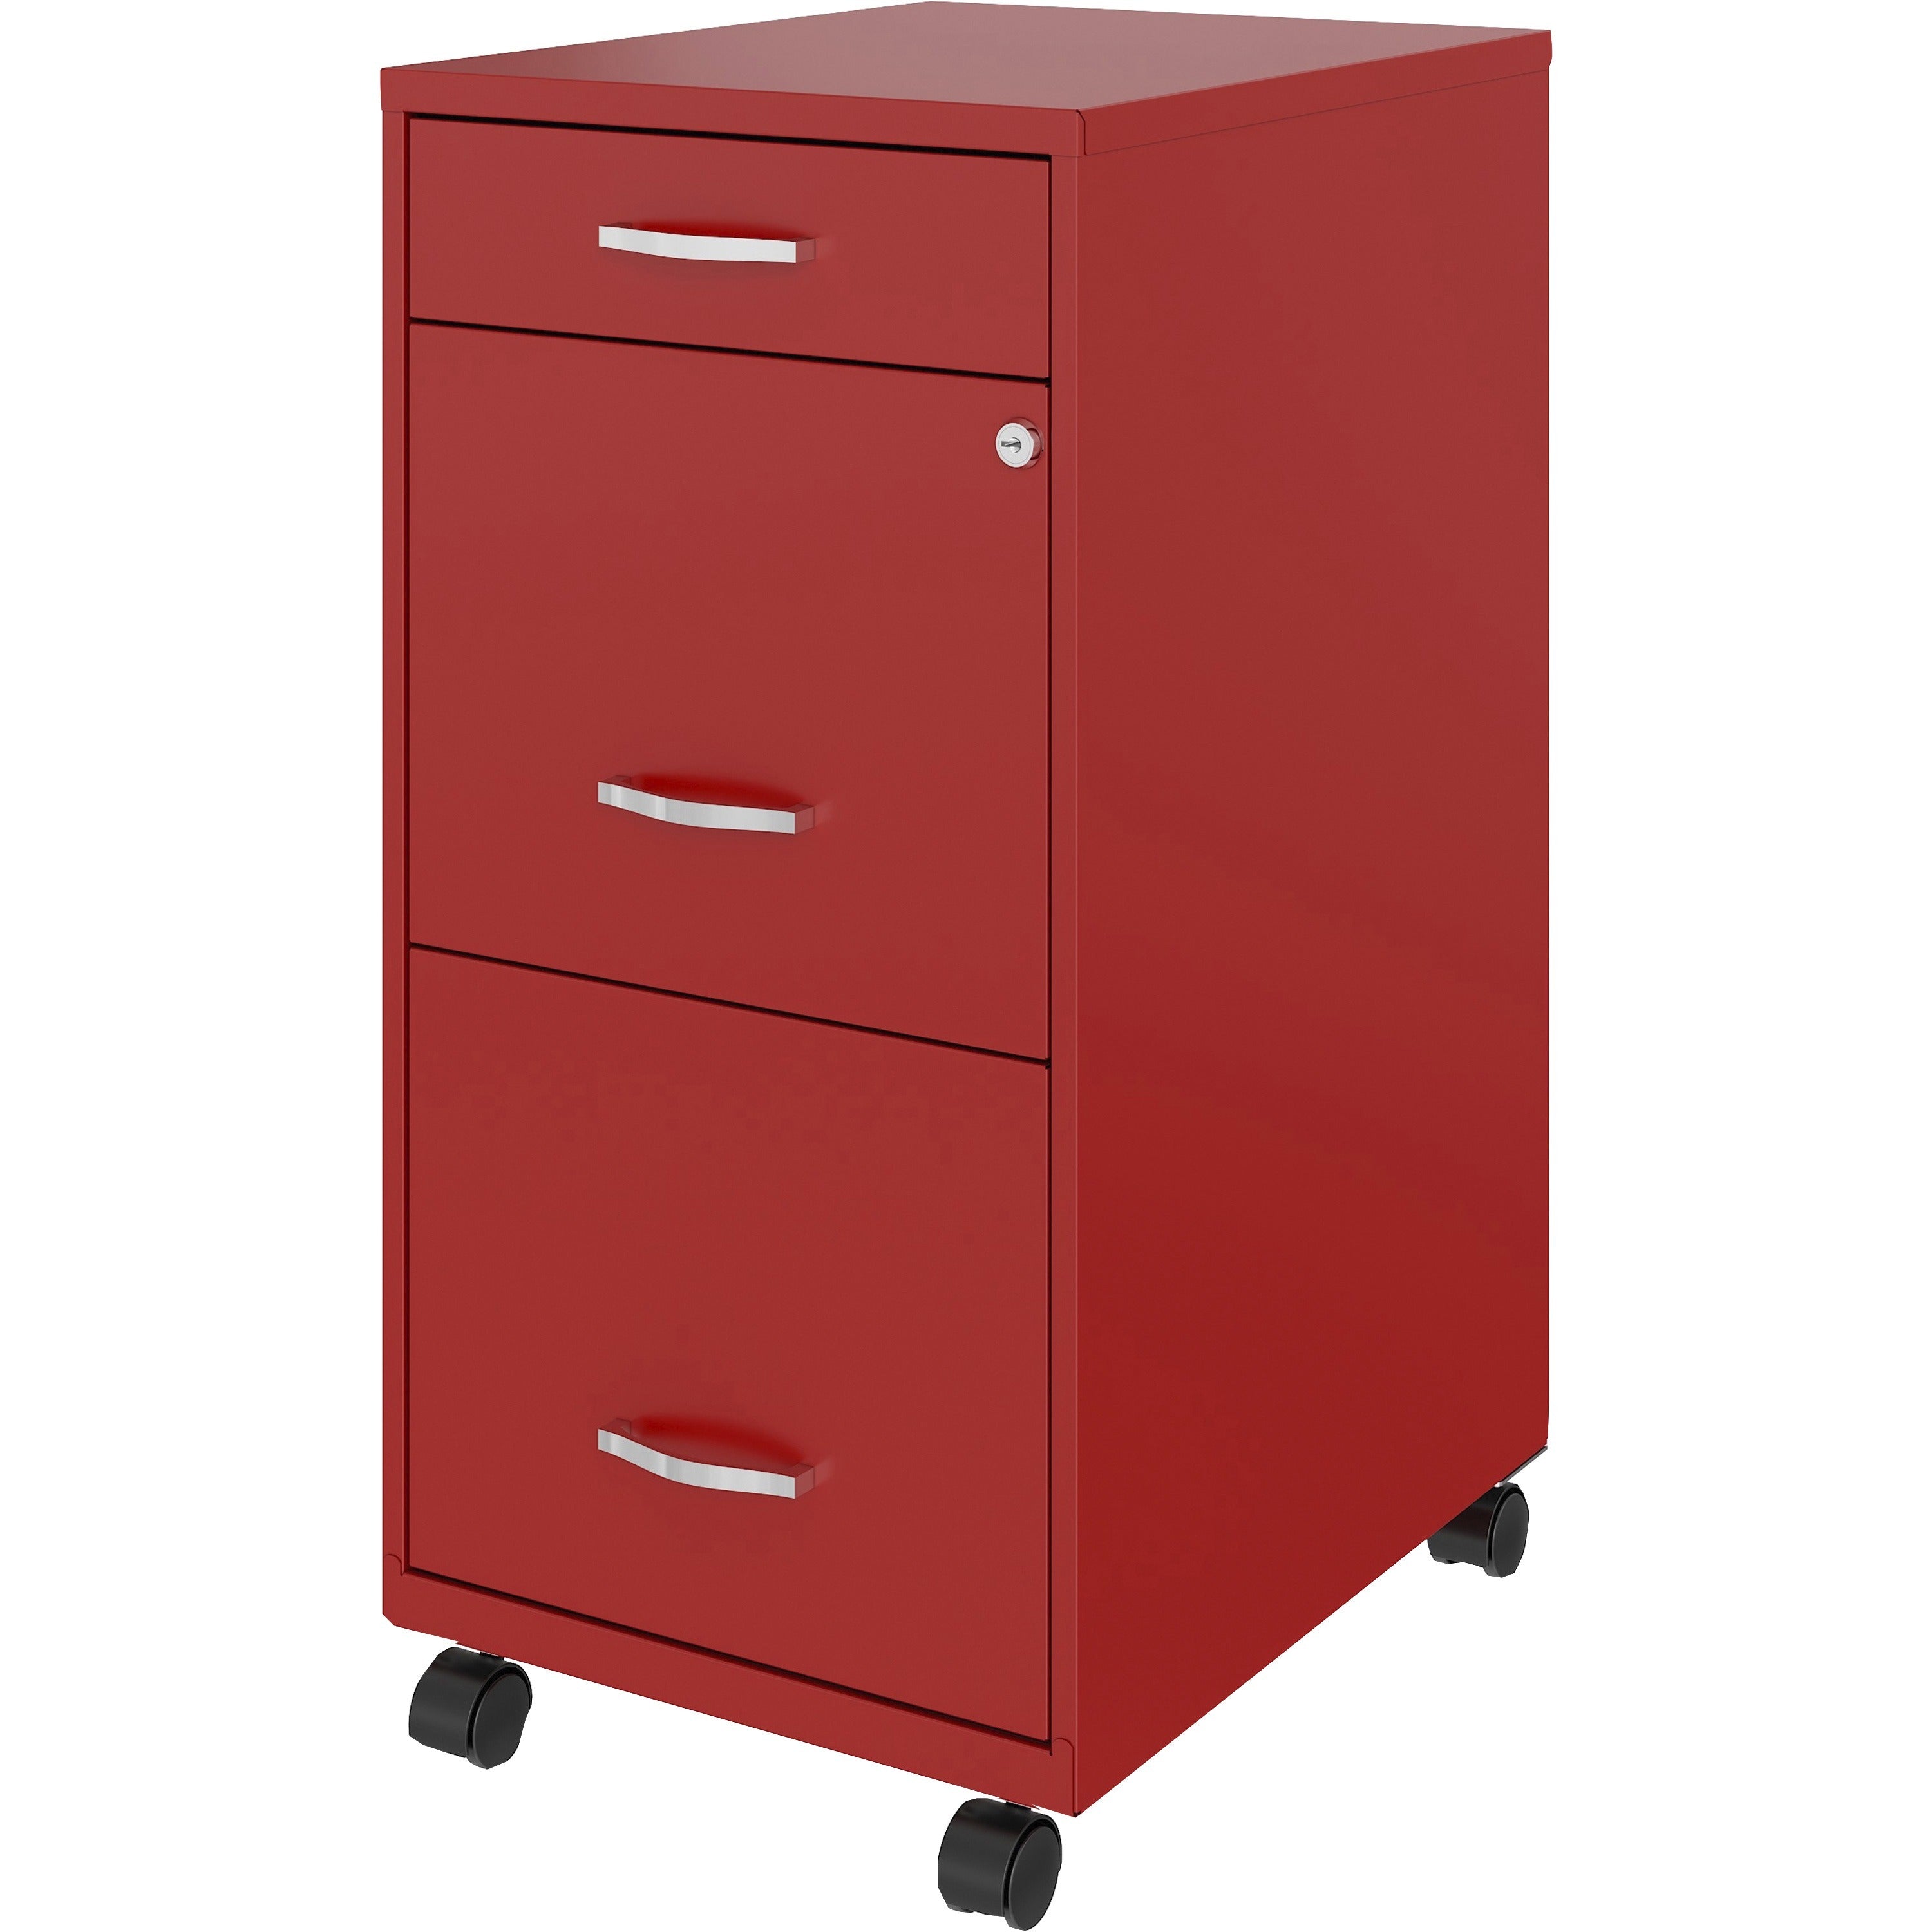 nusparc-mobile-file-cabinet-142-x-18-x-295-3-x-drawers-for-file-box-letter-mobility-locking-drawer-glide-suspension-3-4-drawer-extension-cam-lock-nonporous-surface-red-painted-steel-recycled_nprvf318bmrd - 3